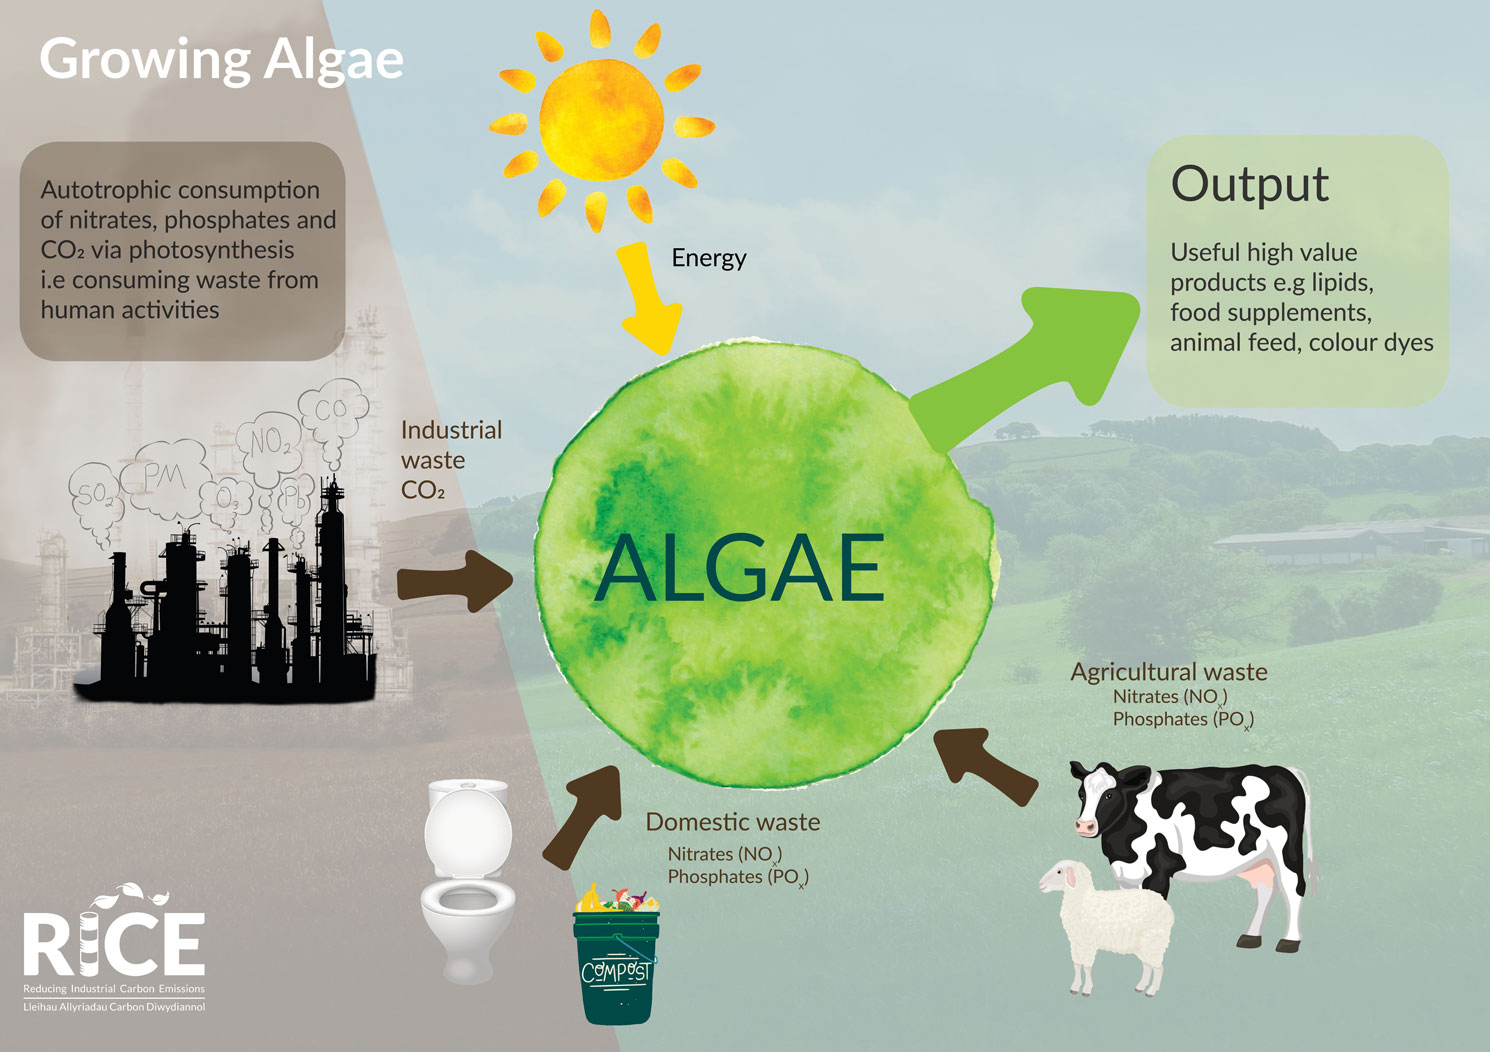 Algae require energy (from the sun or artificial lighting), nutrients, and CO2 to photosynthesise and grow. The CO2 is being taken from the waste emissions of nickel refining and fed into the biorefinery. © 2021 Reducing Industrial Carbon Emissions (RICE)